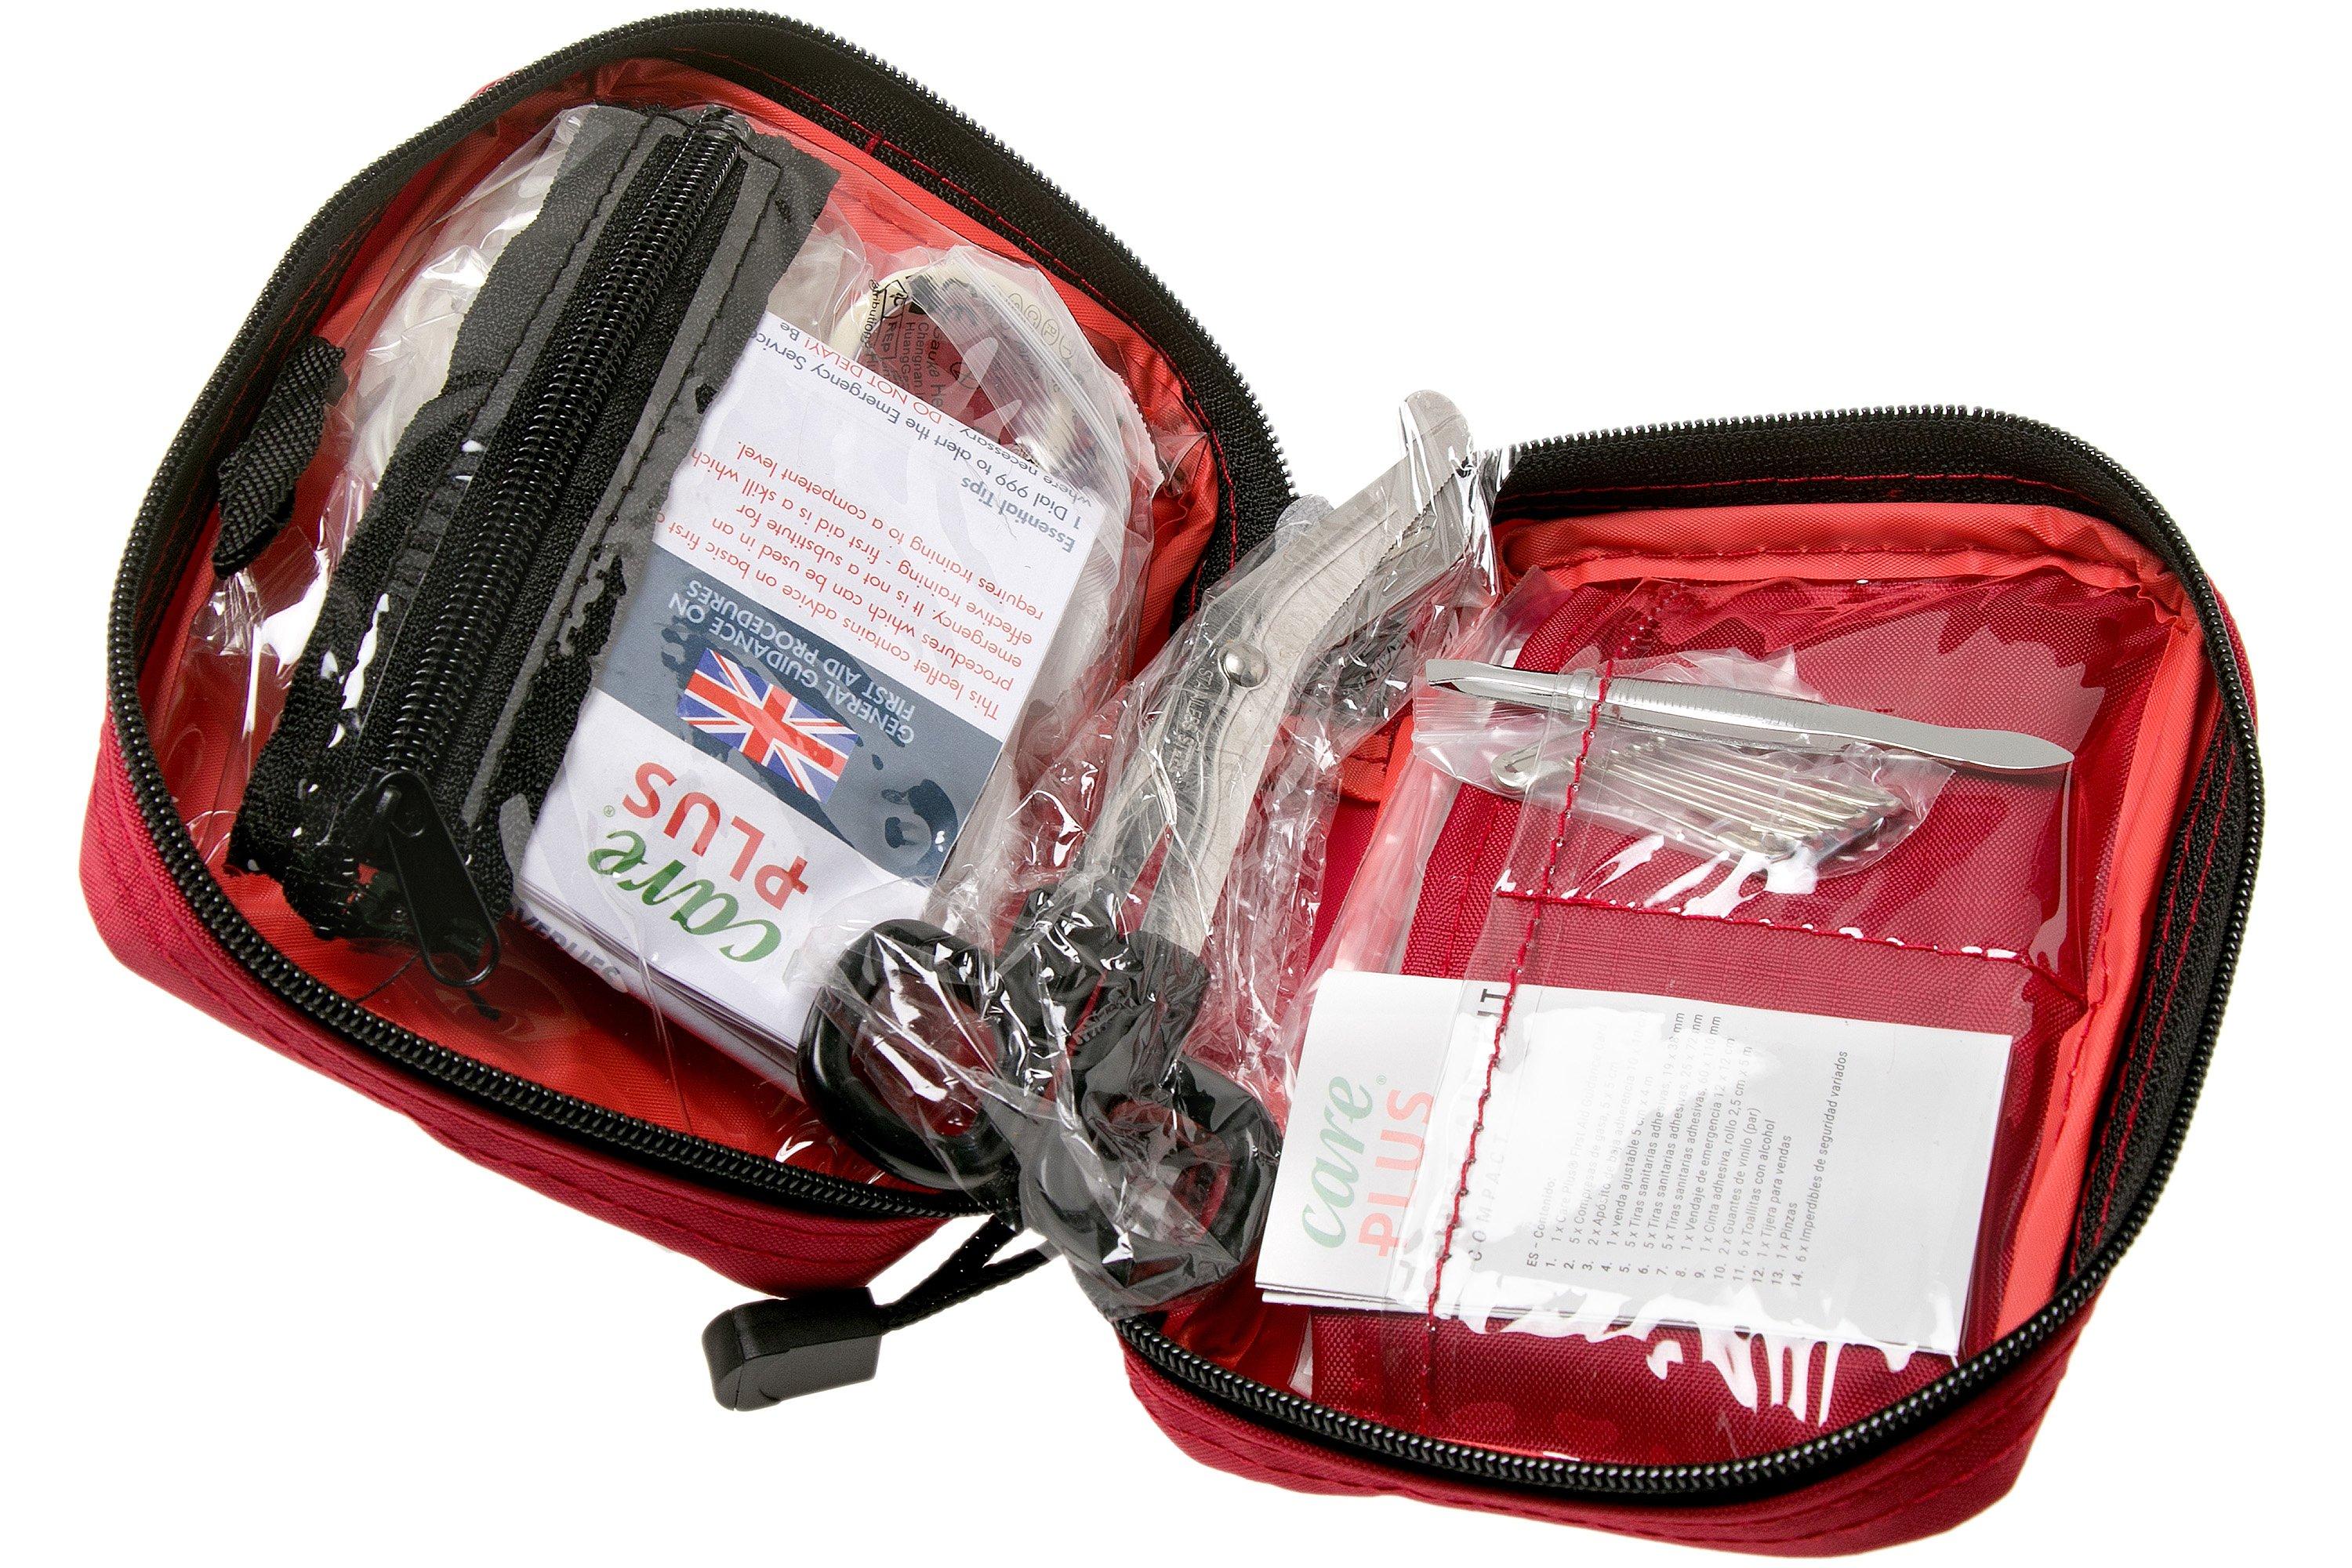 astronomie ei halsband Care Plus First Aid Kit Compact, first aid kit | Advantageously shopping at  Knivesandtools.com